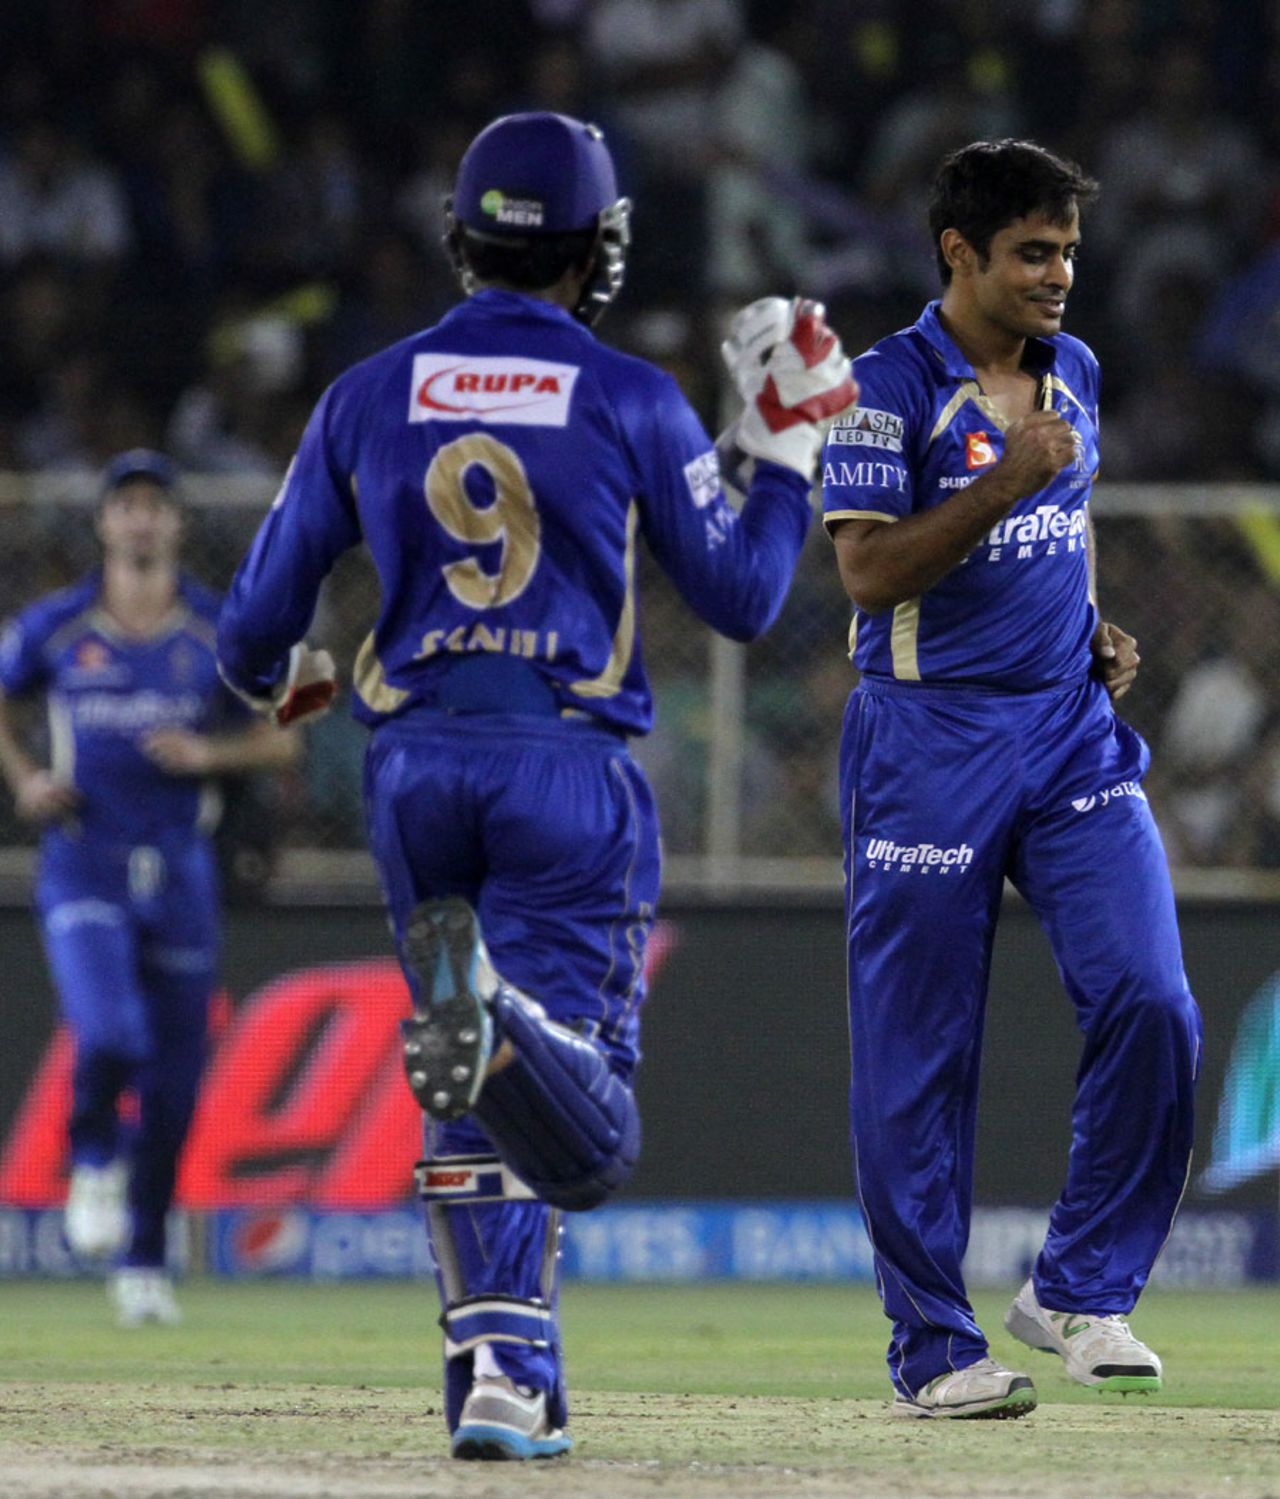 Rajat Bhatia is pleased with the wicket of Kevin Pietersen, Rajasthan Royals v Delhi Daredevils, IPL 2014, Ahmedabad, May 15, 2014